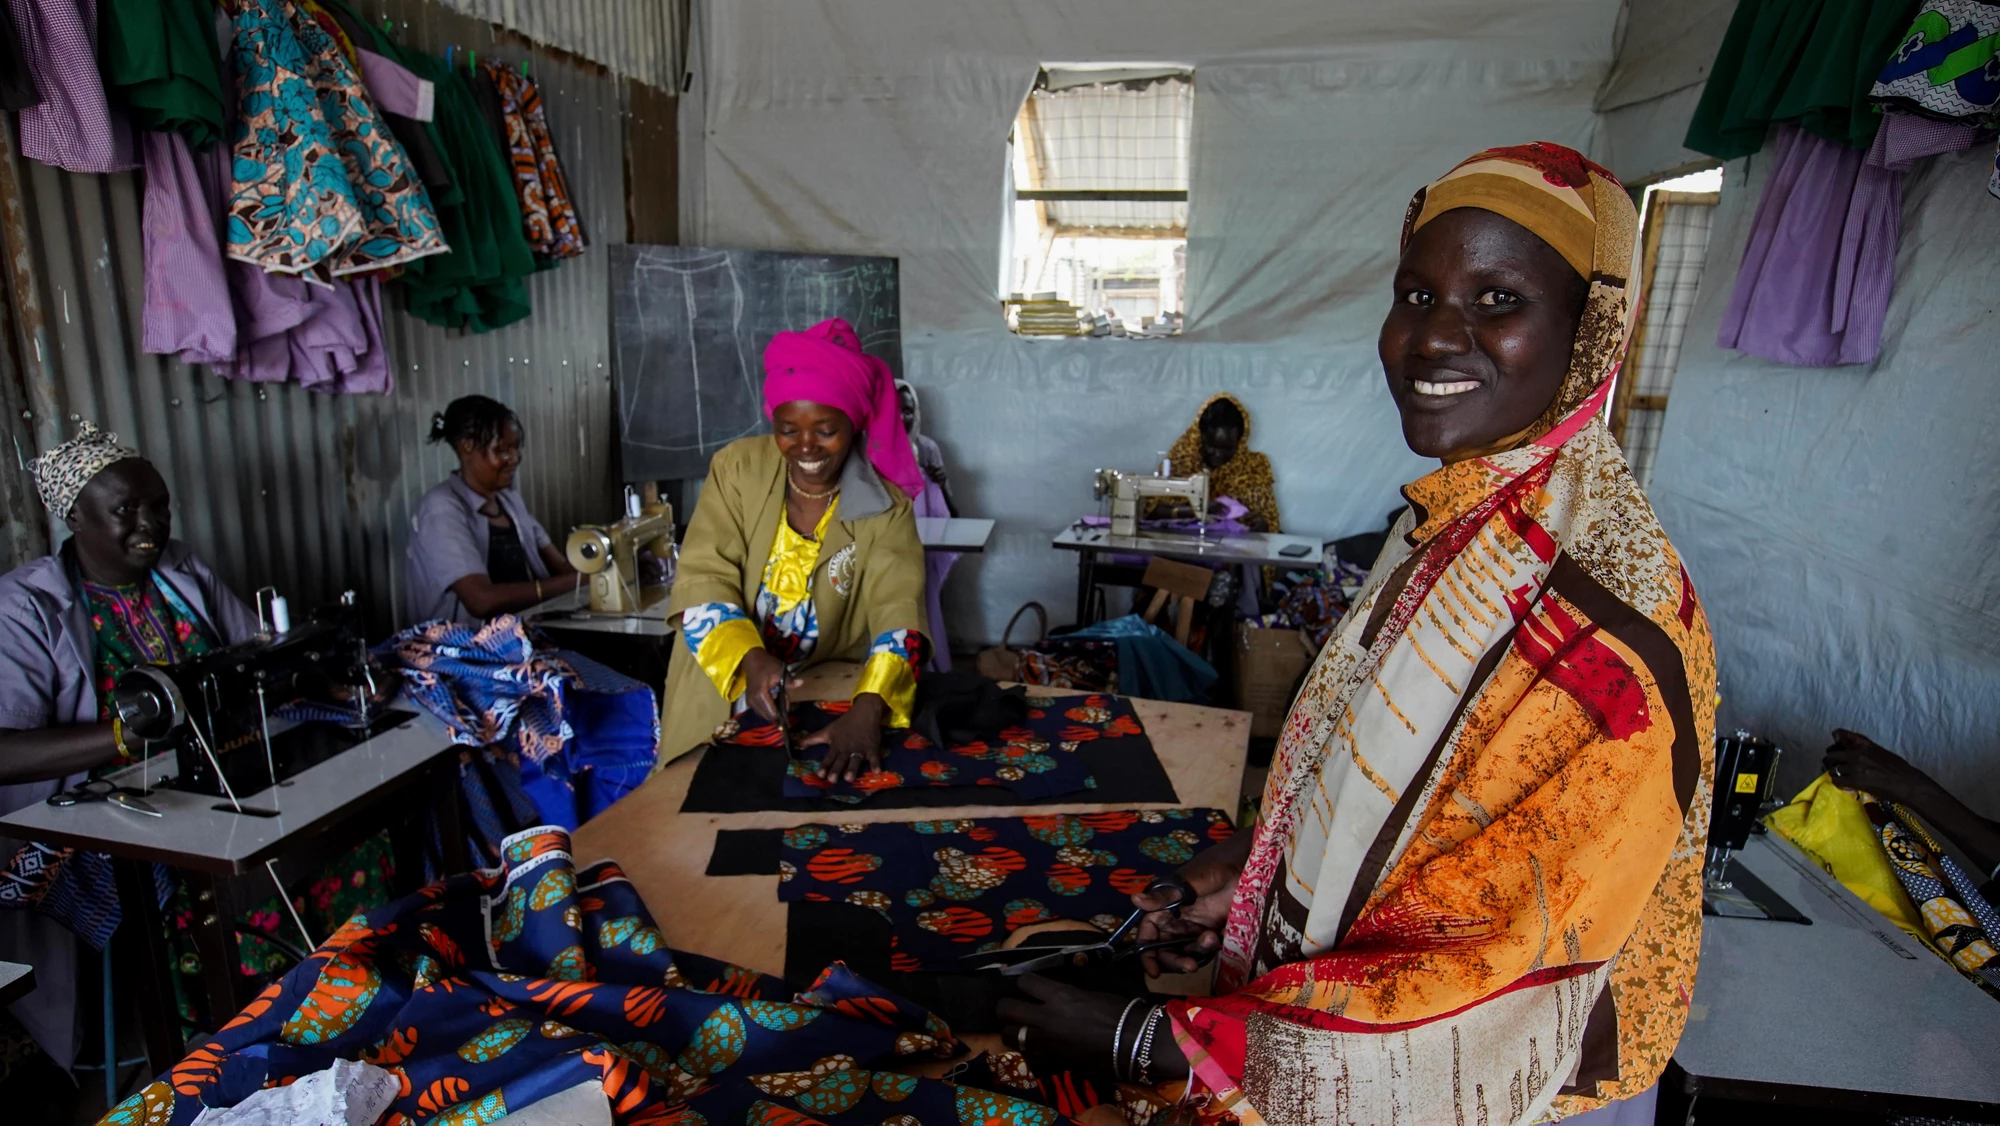 South Sudanese refugee women attend a tailoring class with Mandela ‘Vision’ Tailoring Shop in Kenya’s Kakuma Refugee Camp. The shop is a beneficiary of the Kakuma Kalobeyei Challenge Fund (KKCF), IFC’s first refugee and host community focused program in sub-Saharan Africa.